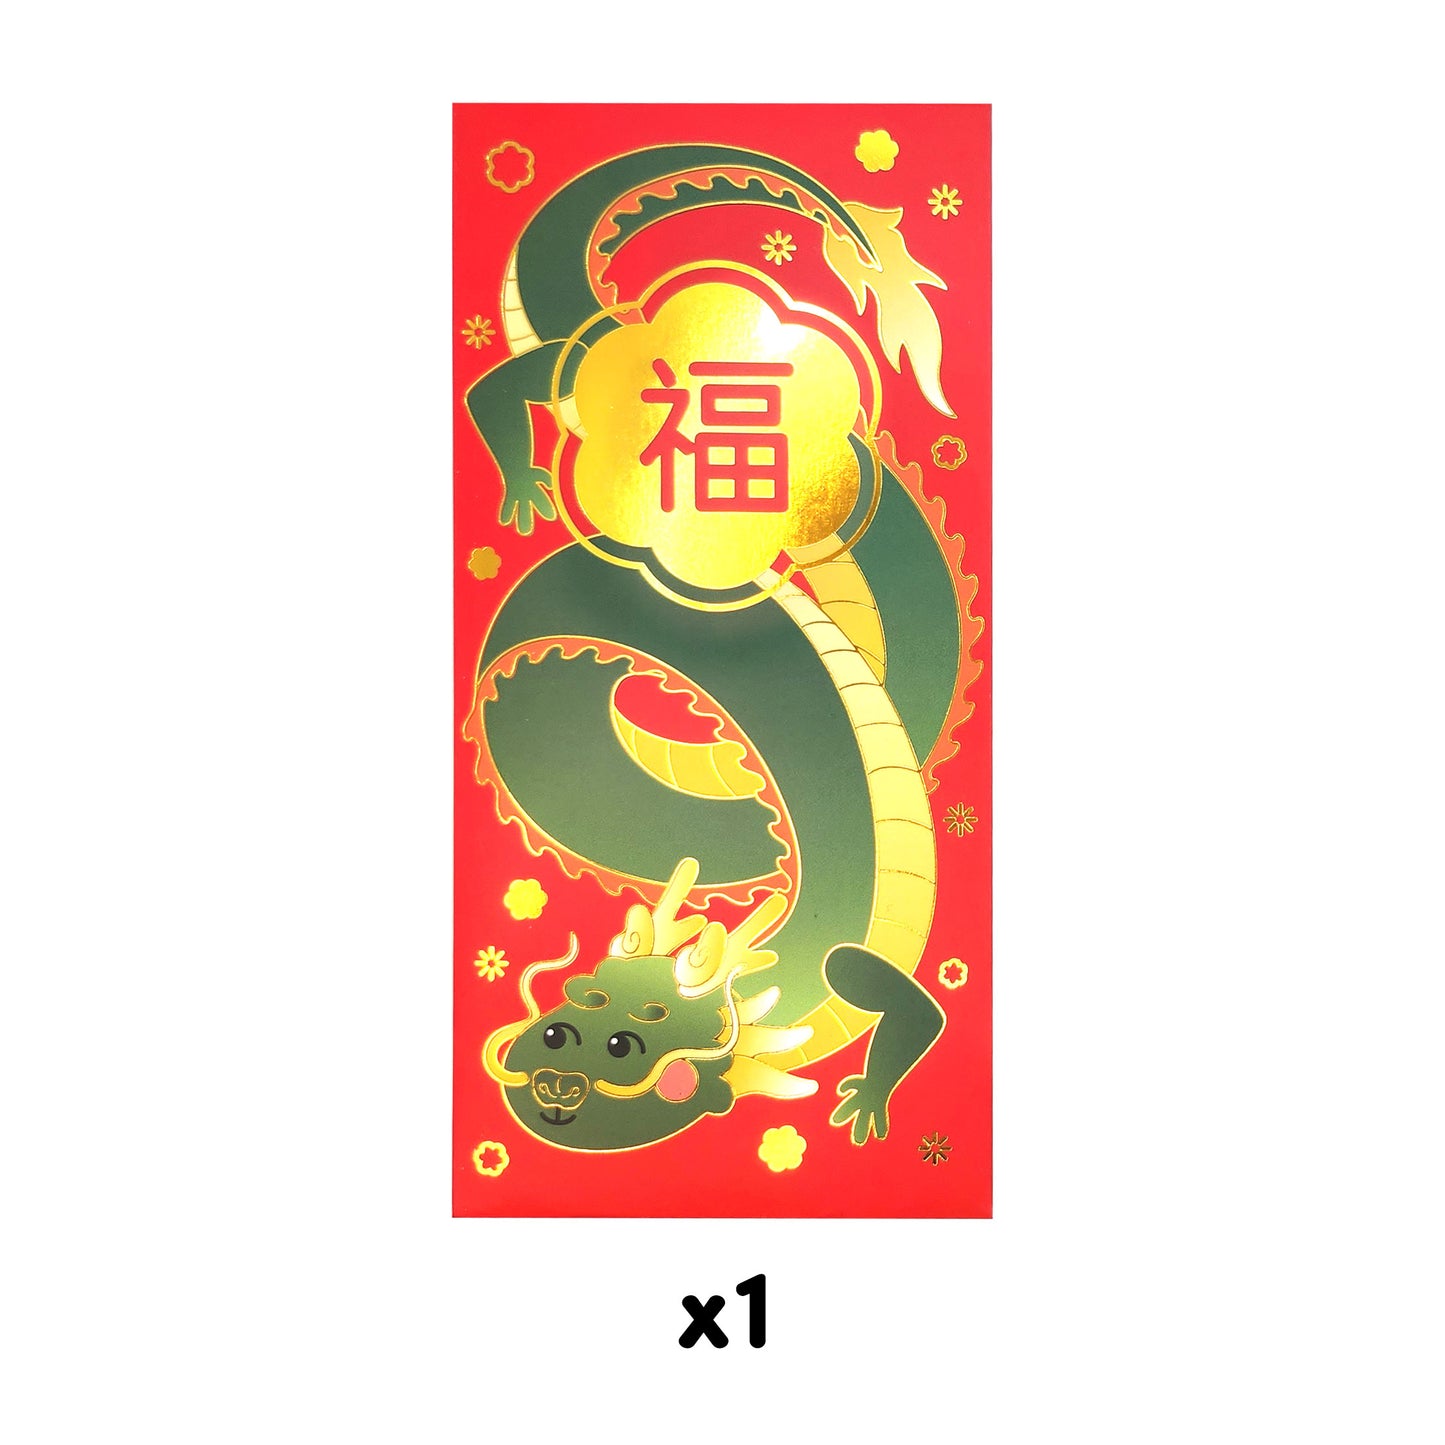 Year of the Dragon Red Envelope 福 "Fortune"